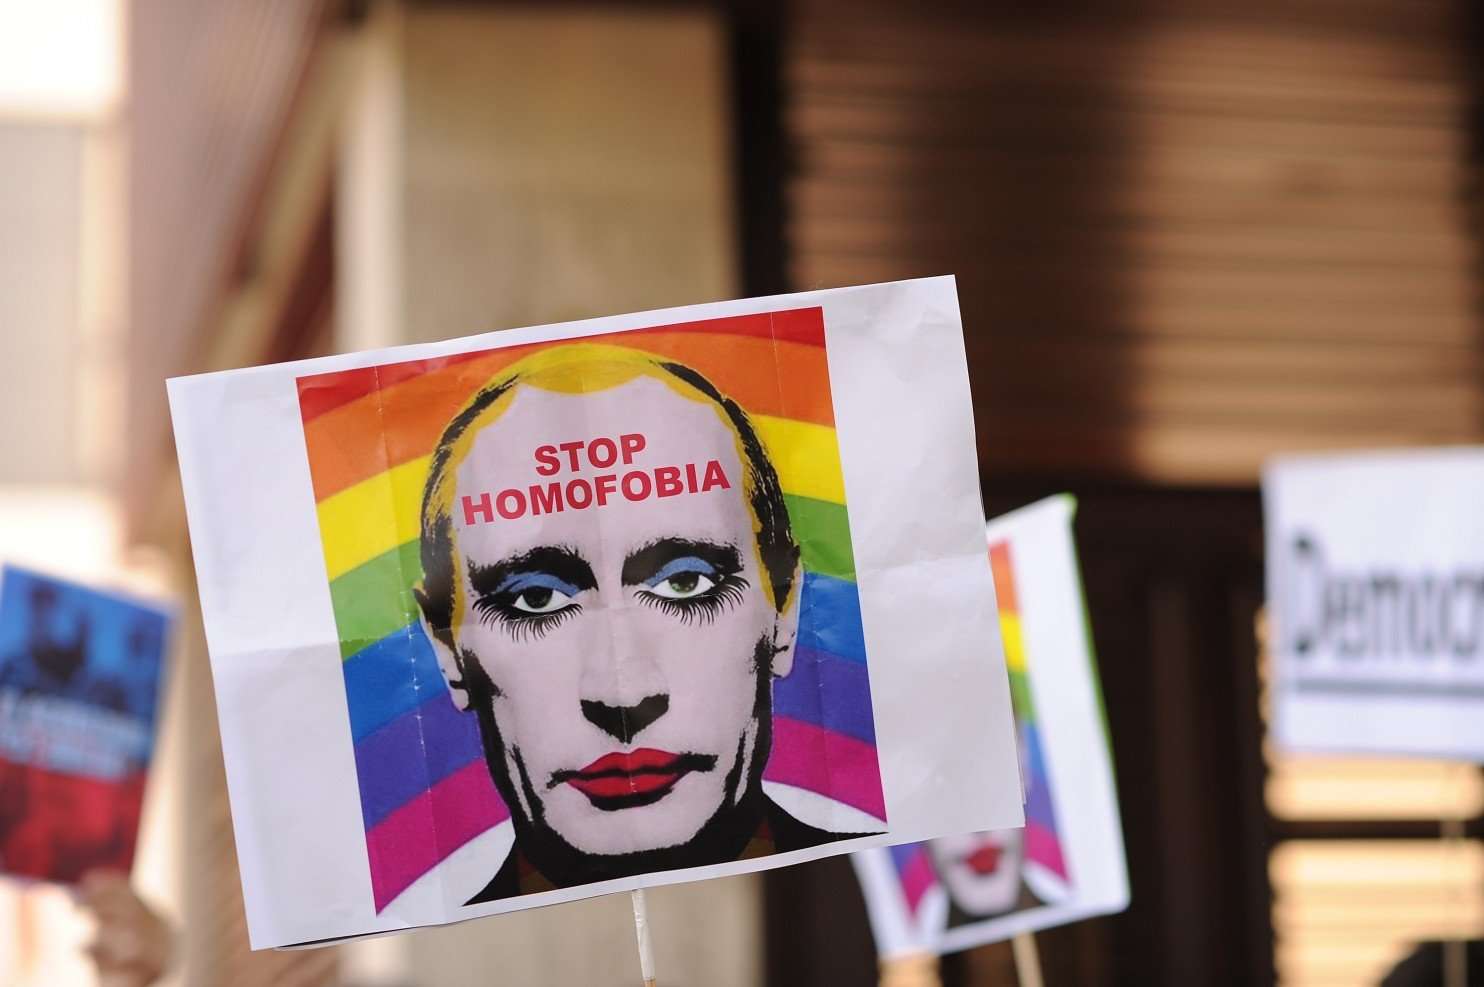 image for It’s now illegal in Russia to share an image of Putin as a gay clown